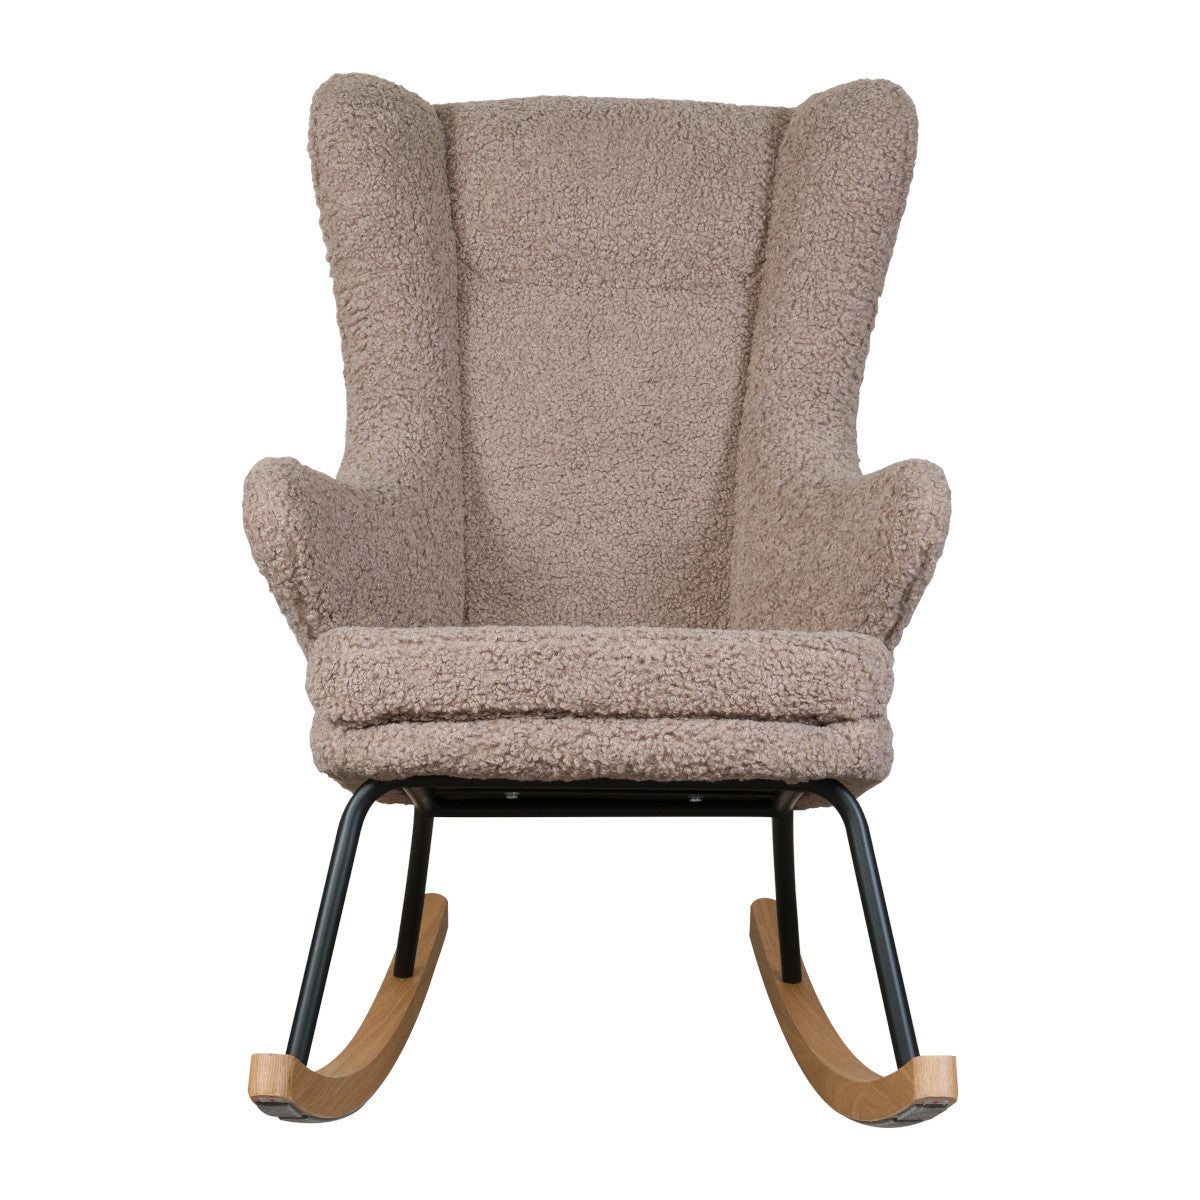 Quax Rocking Nursing Chair – Stone NEW textured fabric - Tiny Tots Baby Store 